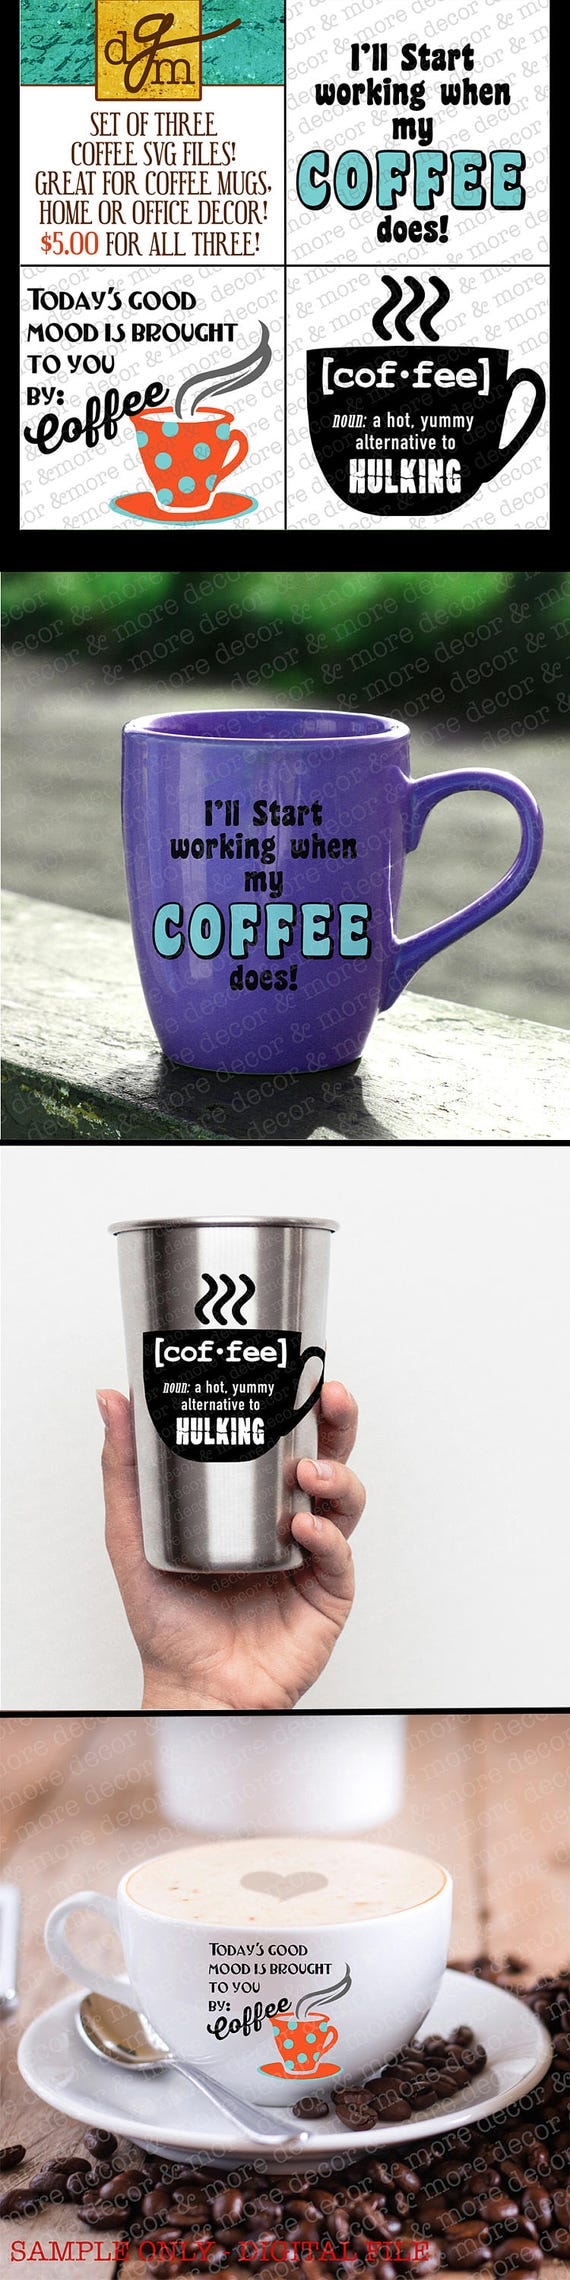 Download 3 COFFEE SVG FILES. 3 Cute and Funny Coffee Svgs. Great for